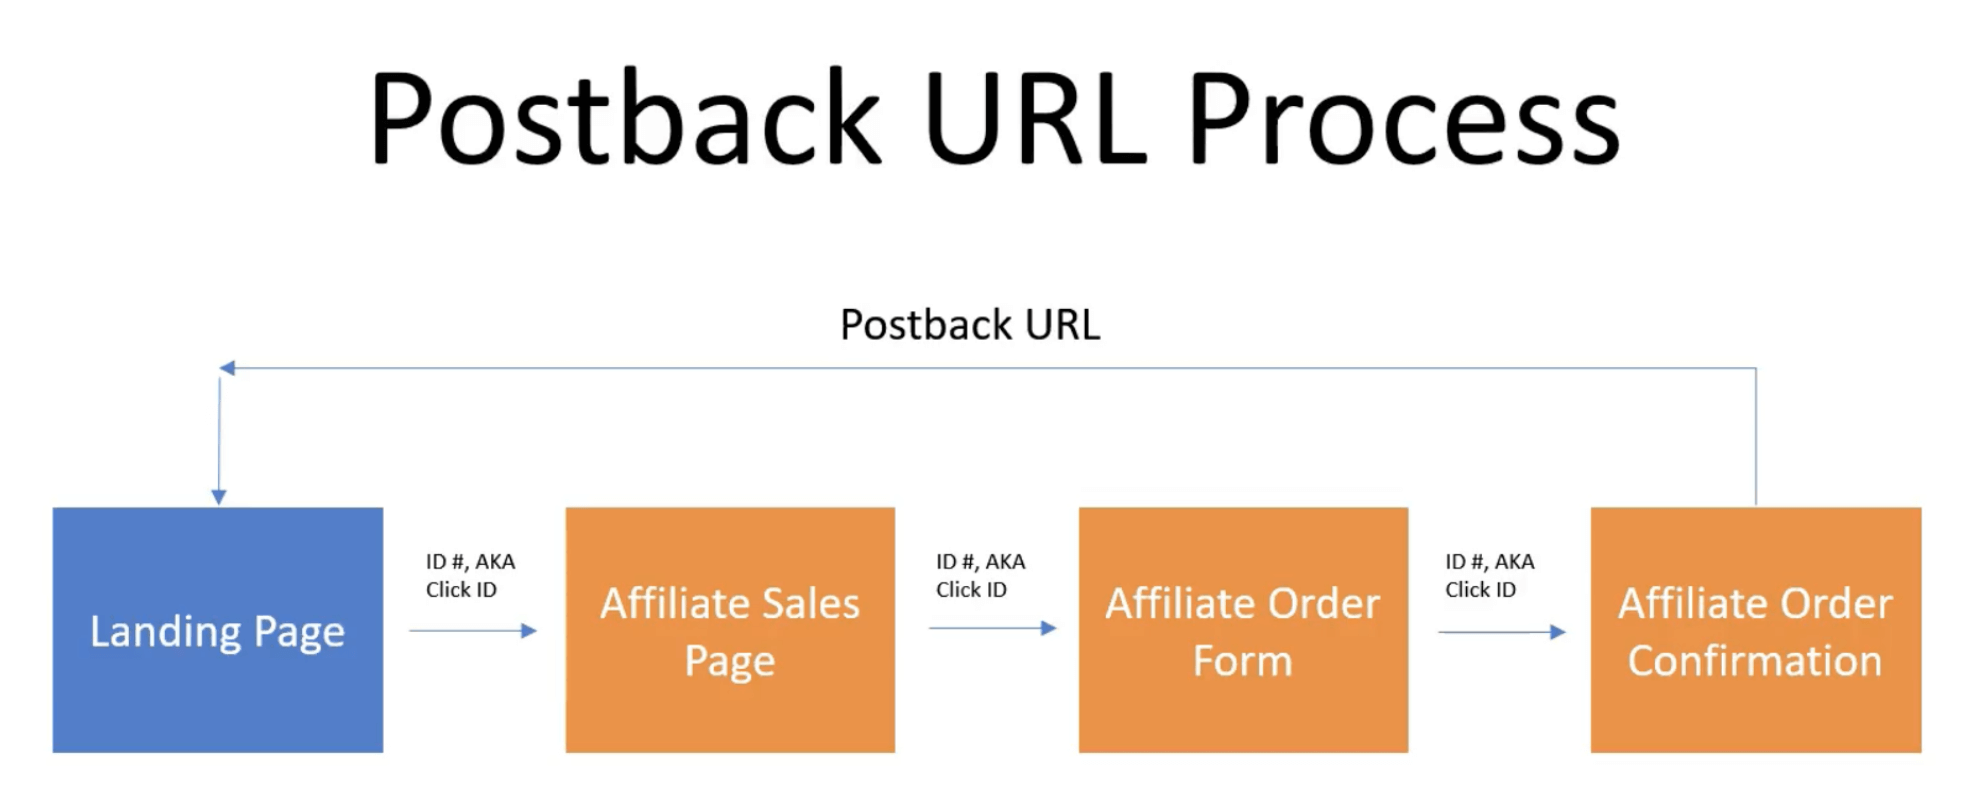 Starting An Affiliate Network: 3 Types of Affiliate Tracking
postback url tracking